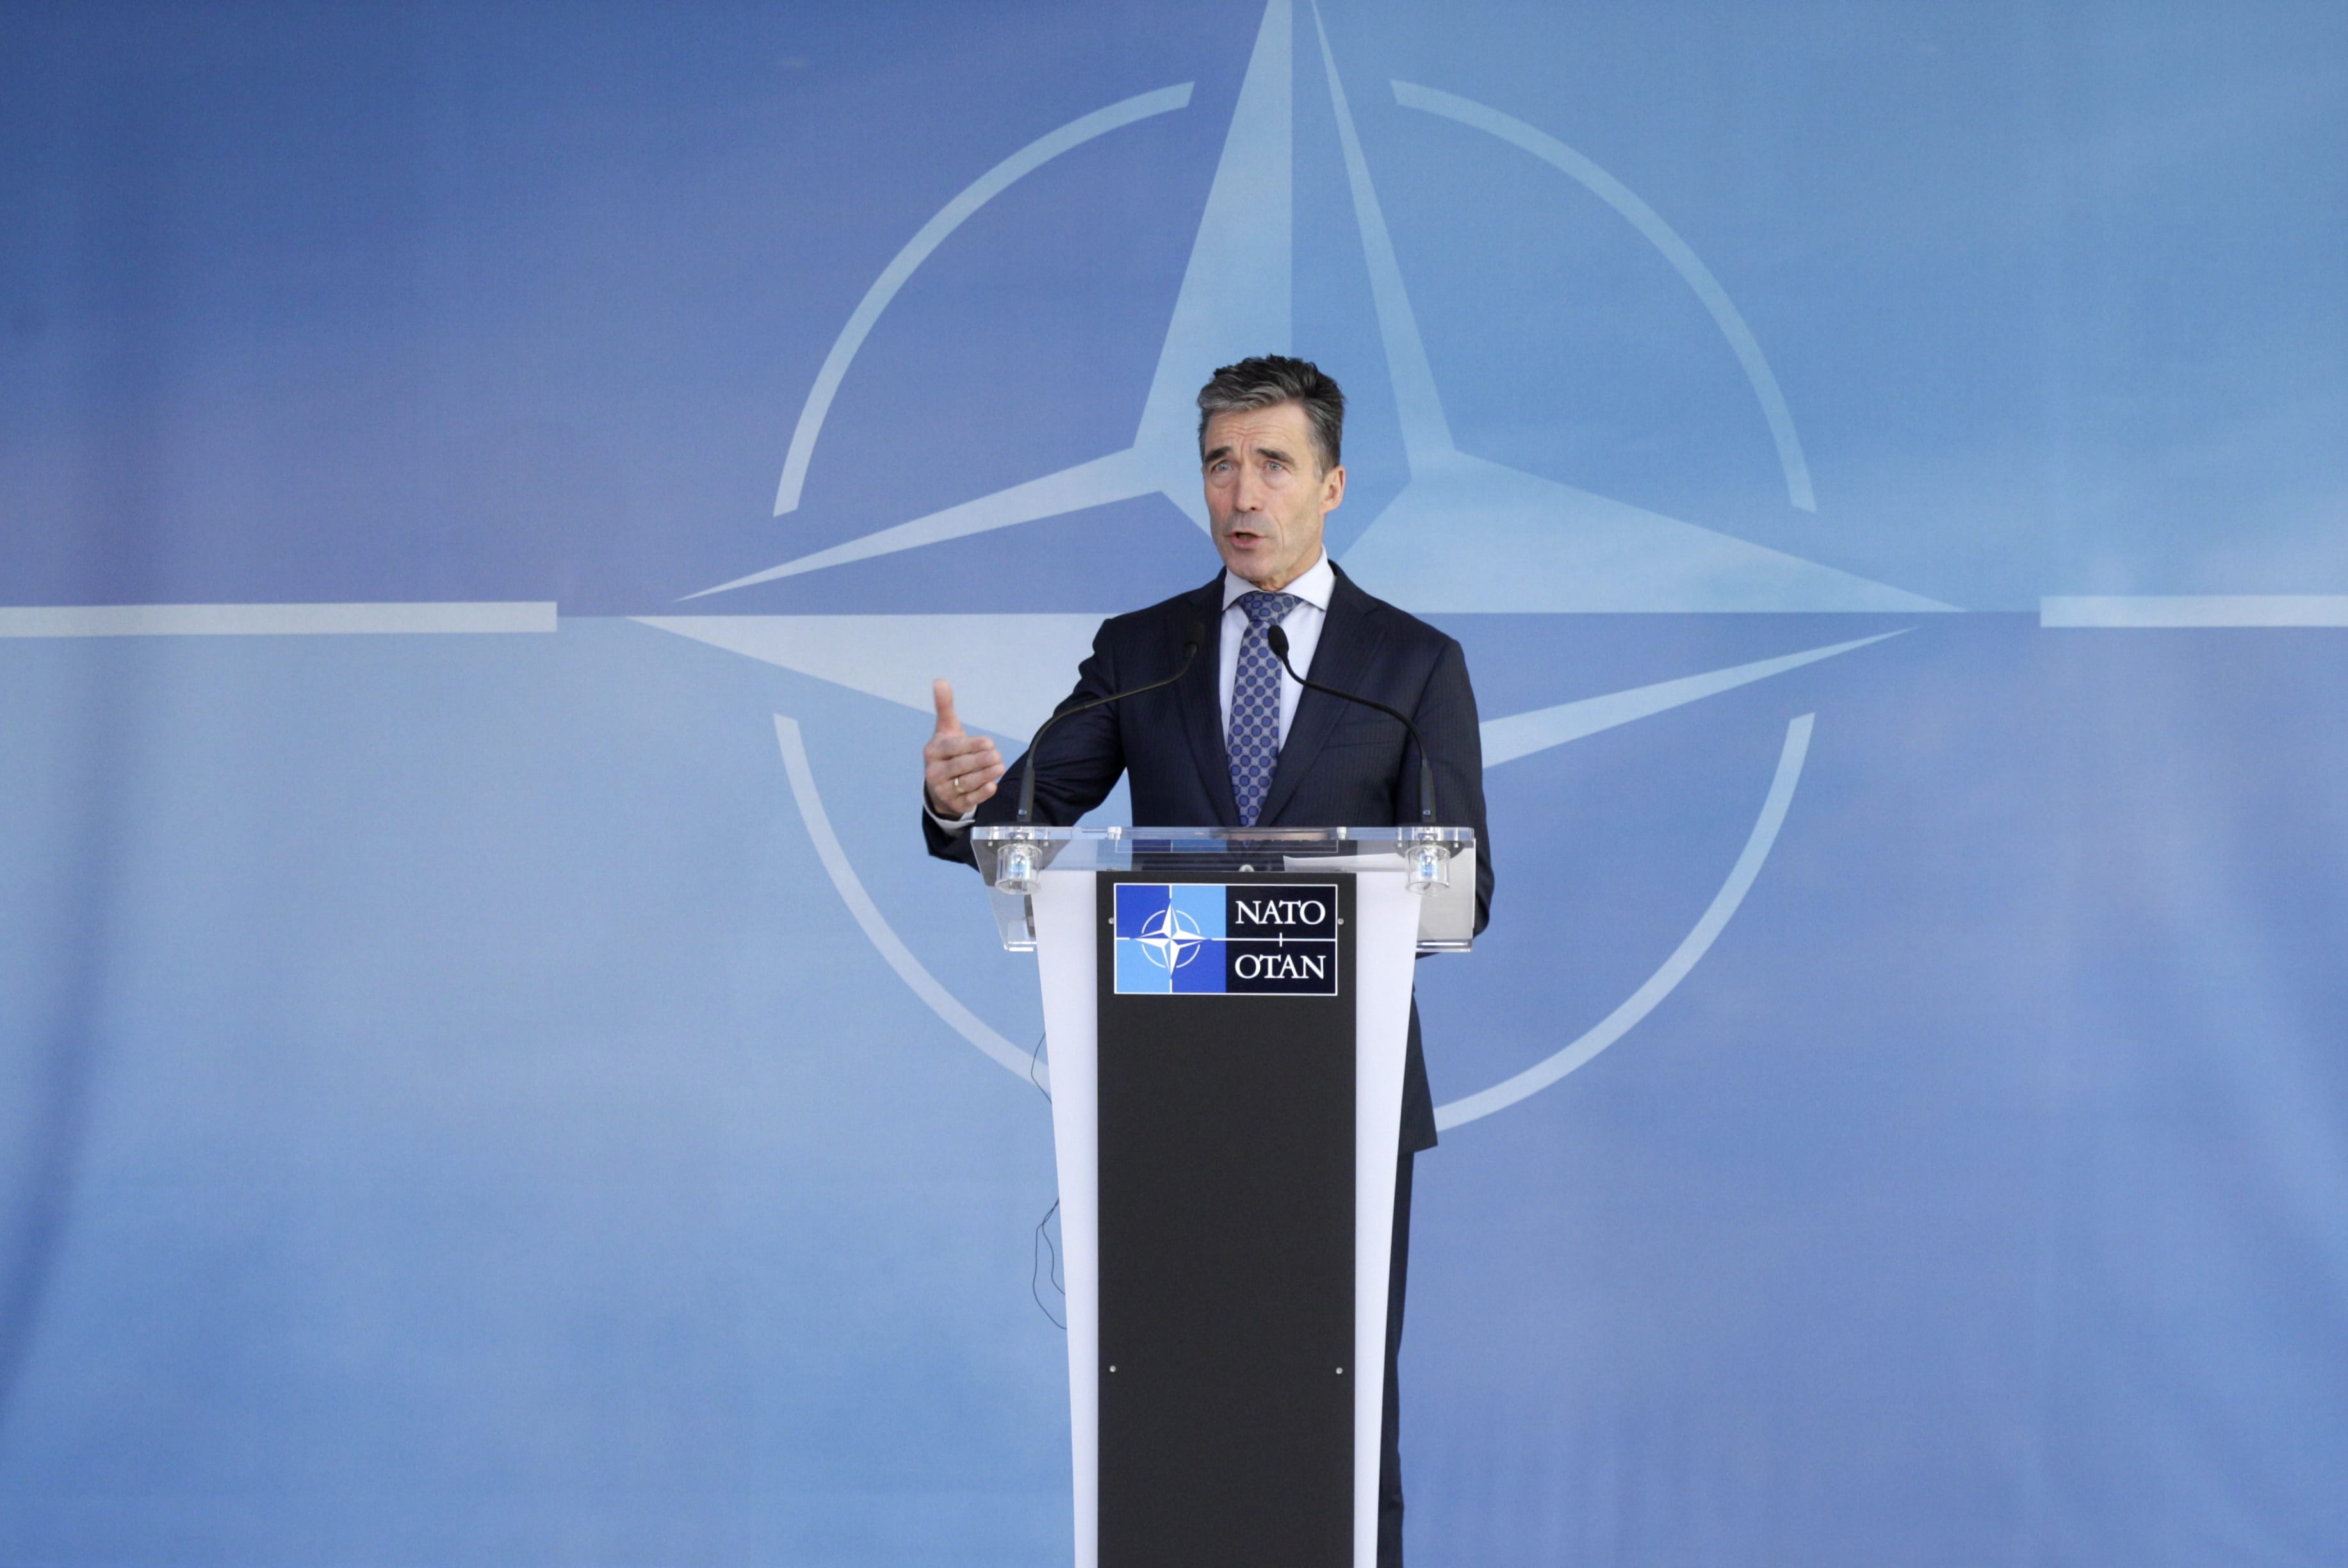 NATO Secretary General Anders Fogh Rasmussen addresses the media after an NATO Ambassadors Council at NATO headquarters in Brussels on Wednesday.